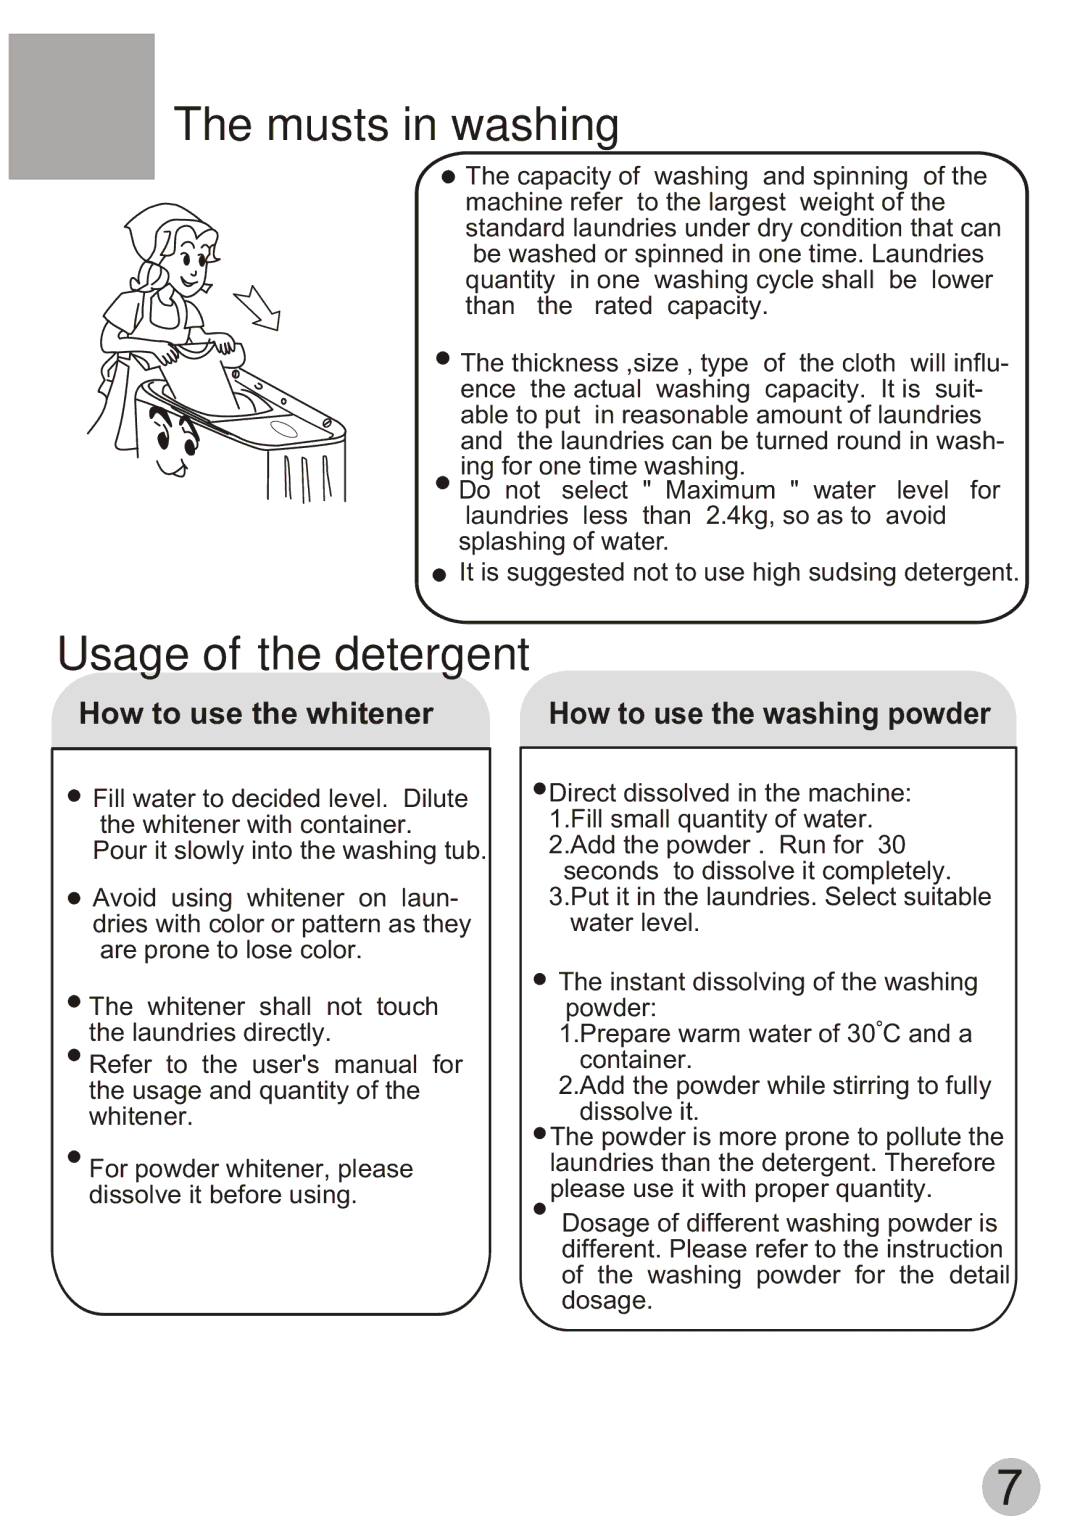 Haier HWM55-13S user manual Musts in washing, Usage of the detergent 